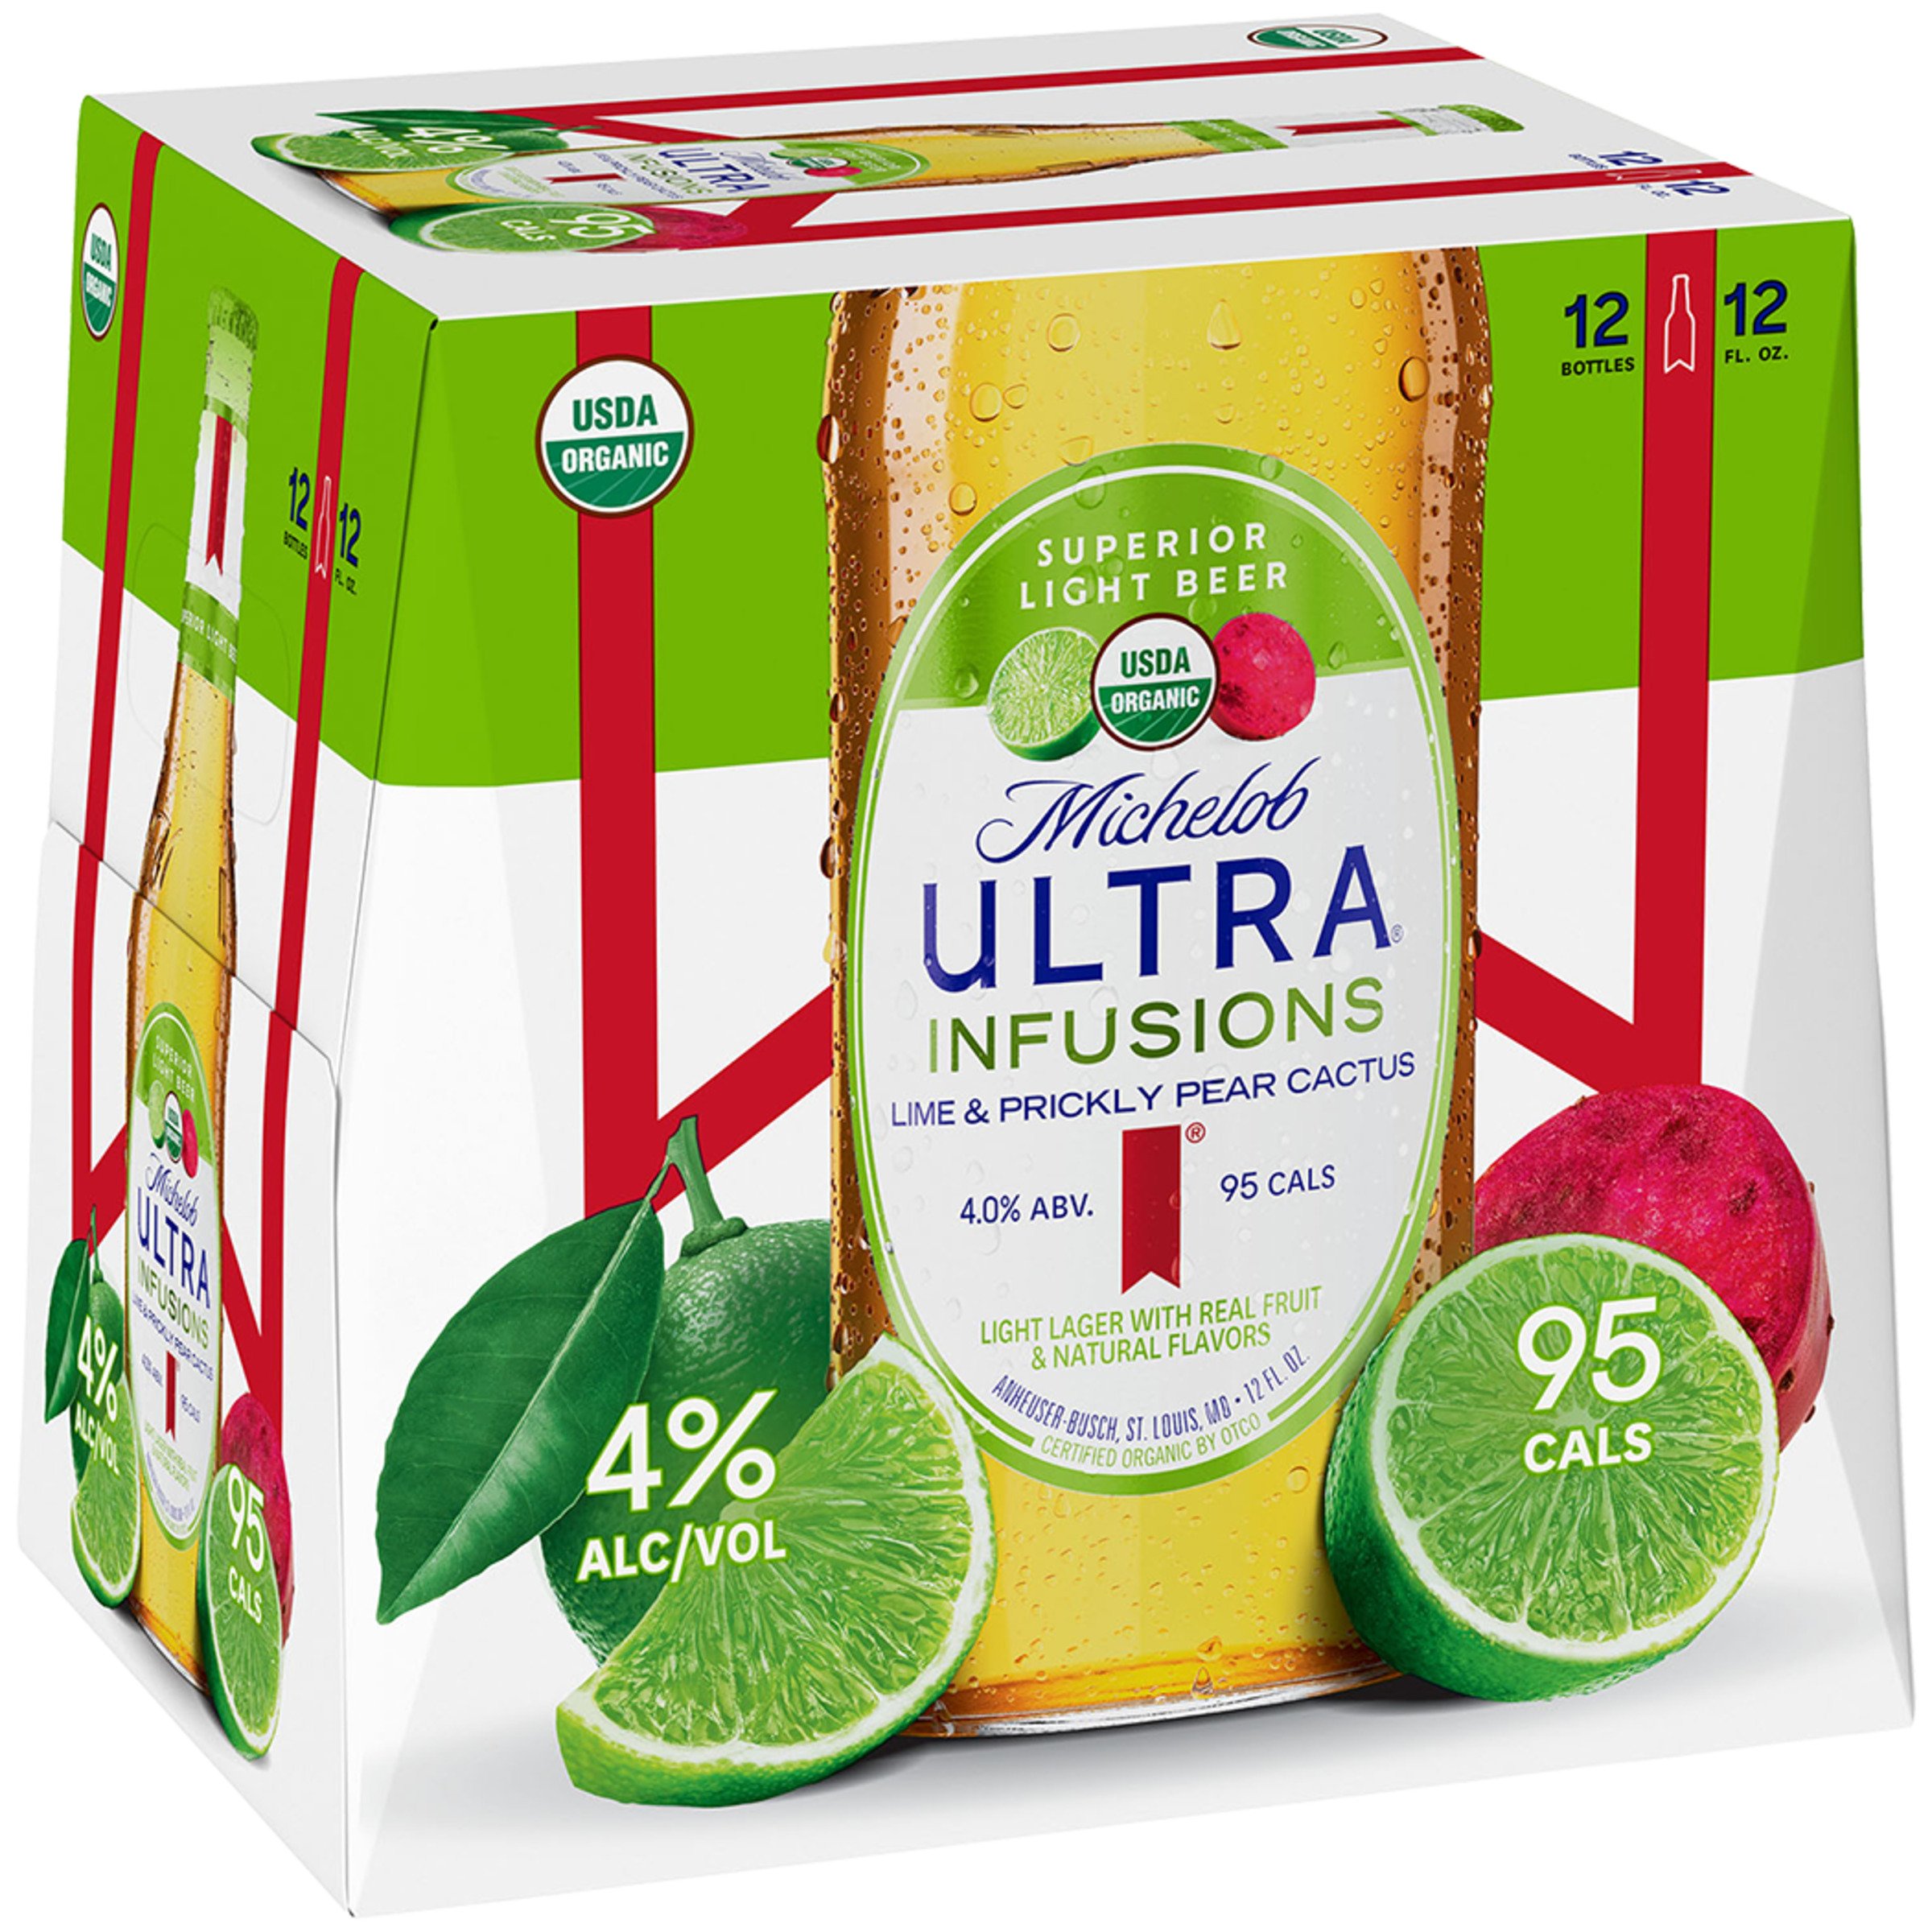 Michelob Ultra Infusions Lime Prickly Pear Cactus Beer 12 Oz Bottles Shop Beer At H E B